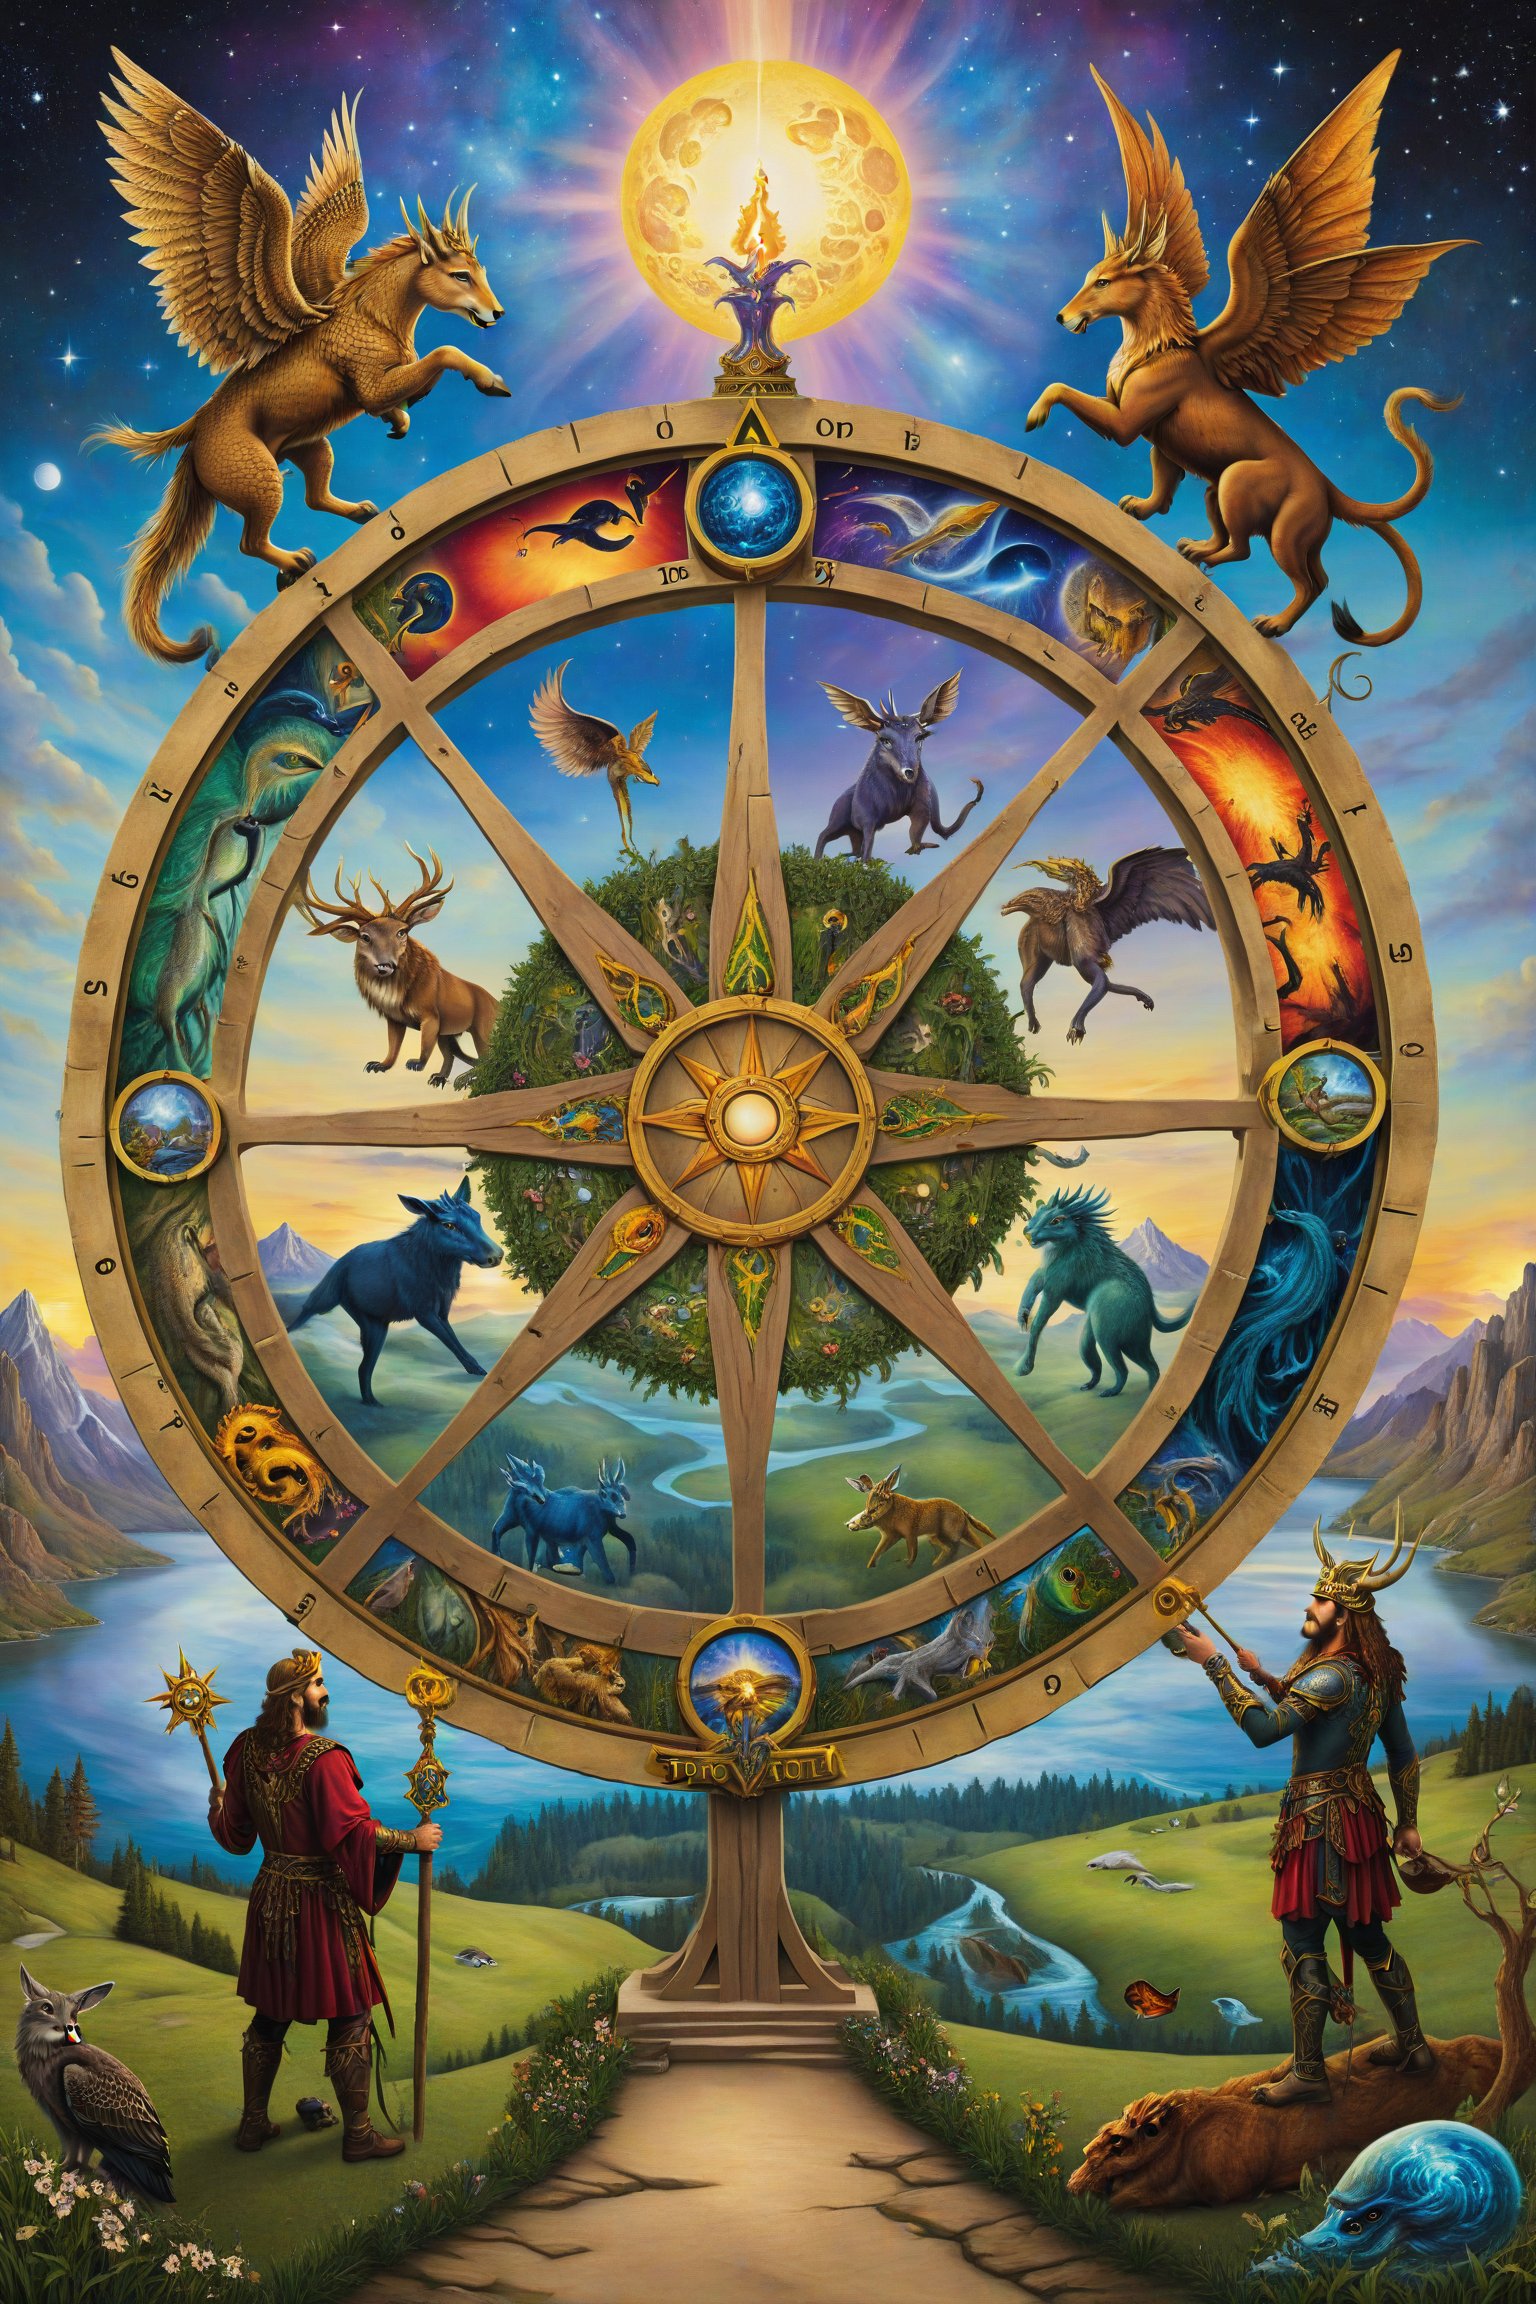 Wheel of Fortune card of tarot: A giant wheel with different creatures and symbols, representing cycles of change and destiny. artfrahm,visionary art style